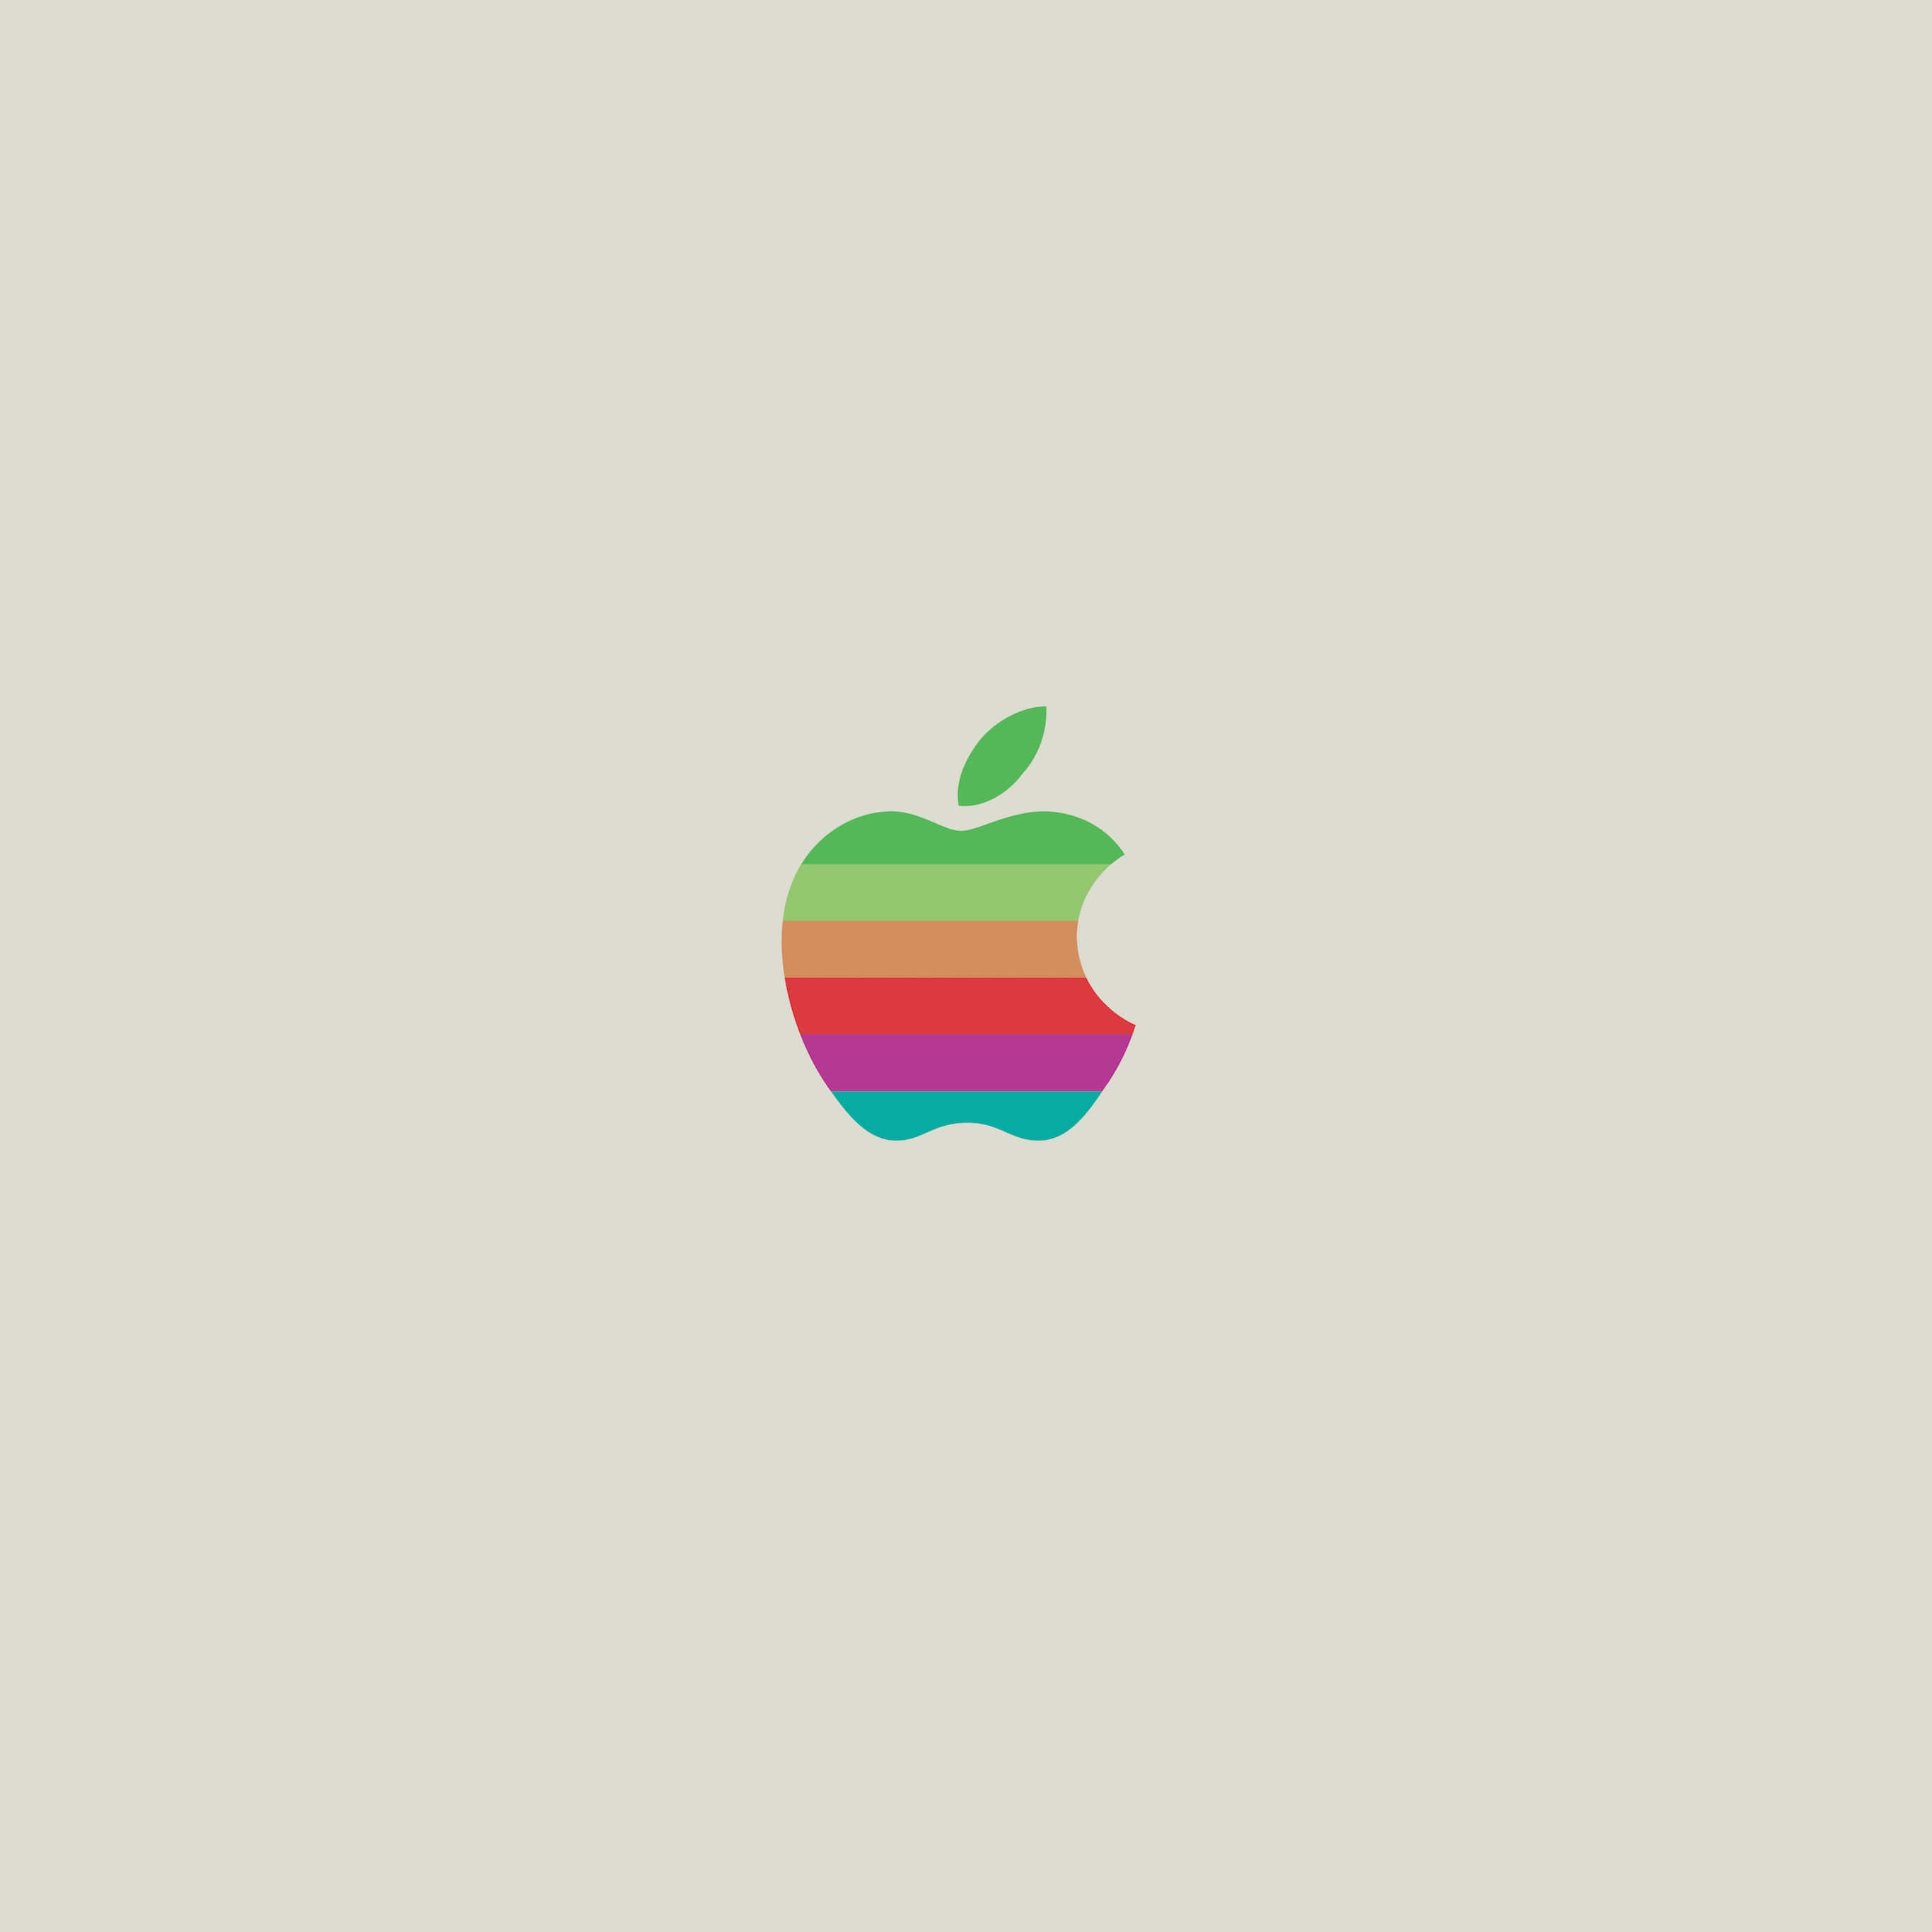 Stunning 3D Apple Logo in Vibrant Colors